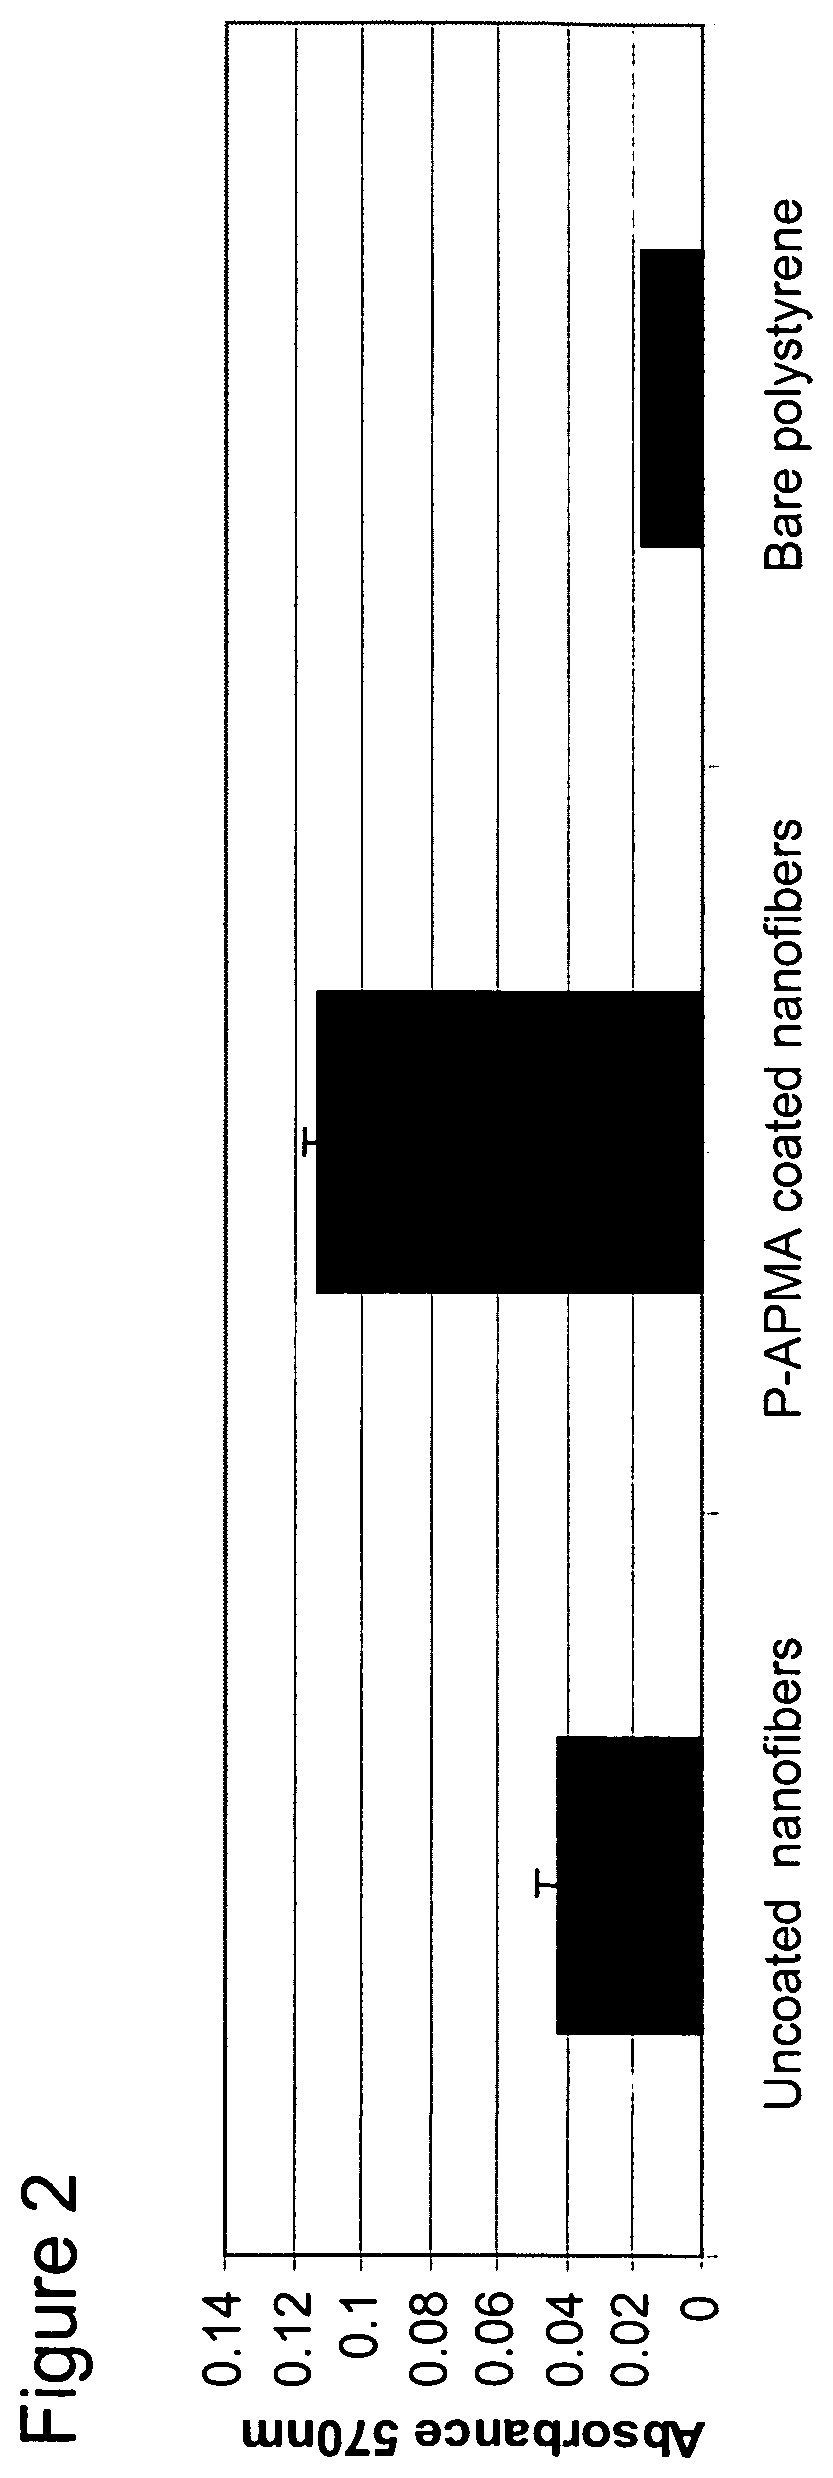 Polymeric coatings and methods for cell attachment